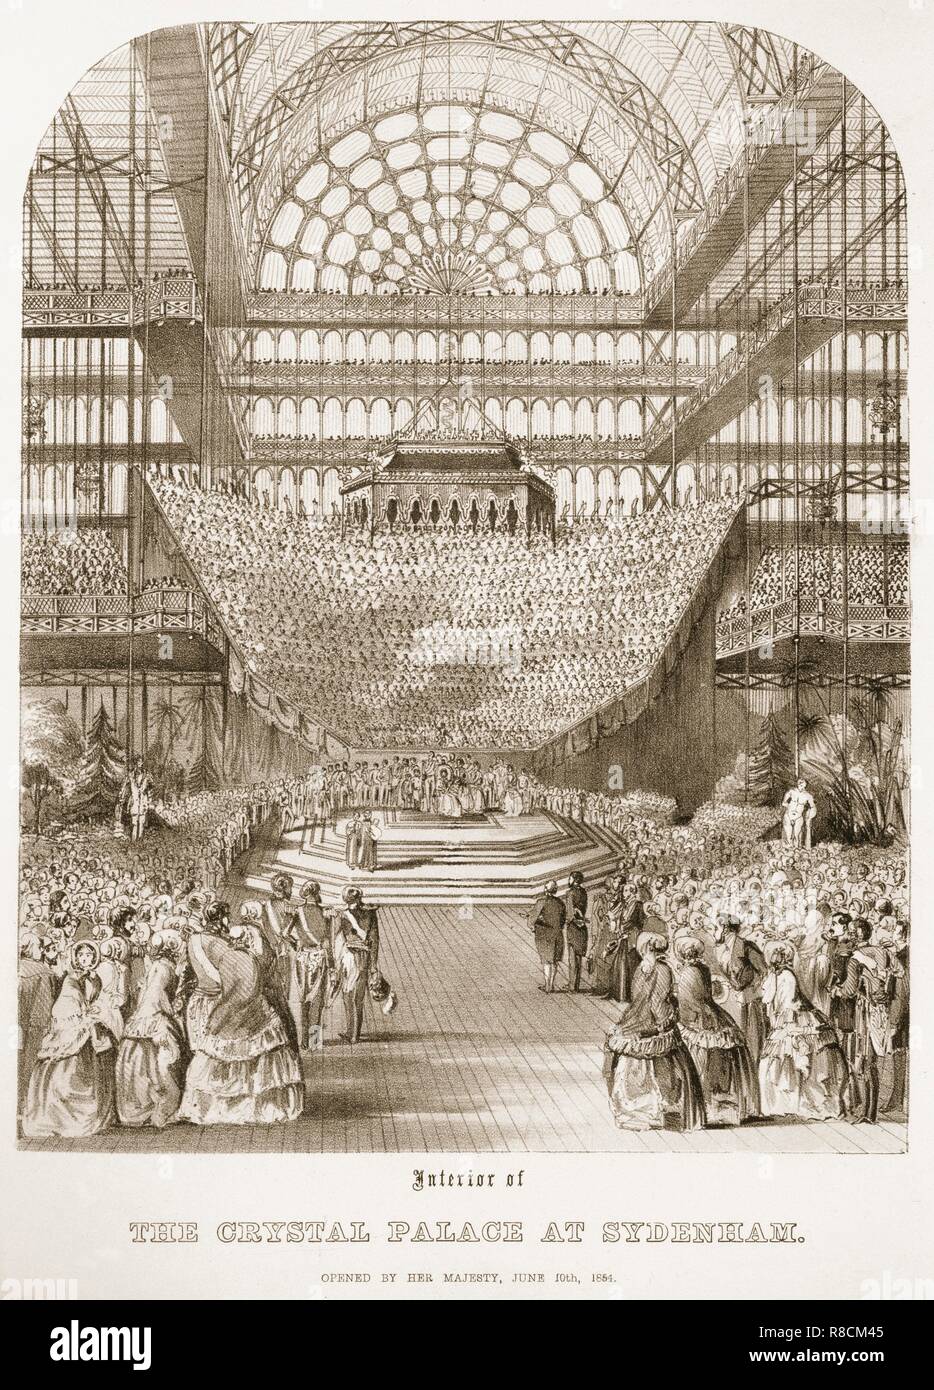 Opening of Crystal Palace at Sydenham by Queen Victoria on June 10th 1854. Creator: Thomas Hosmer Shepherd (1792-1864). Stock Photo